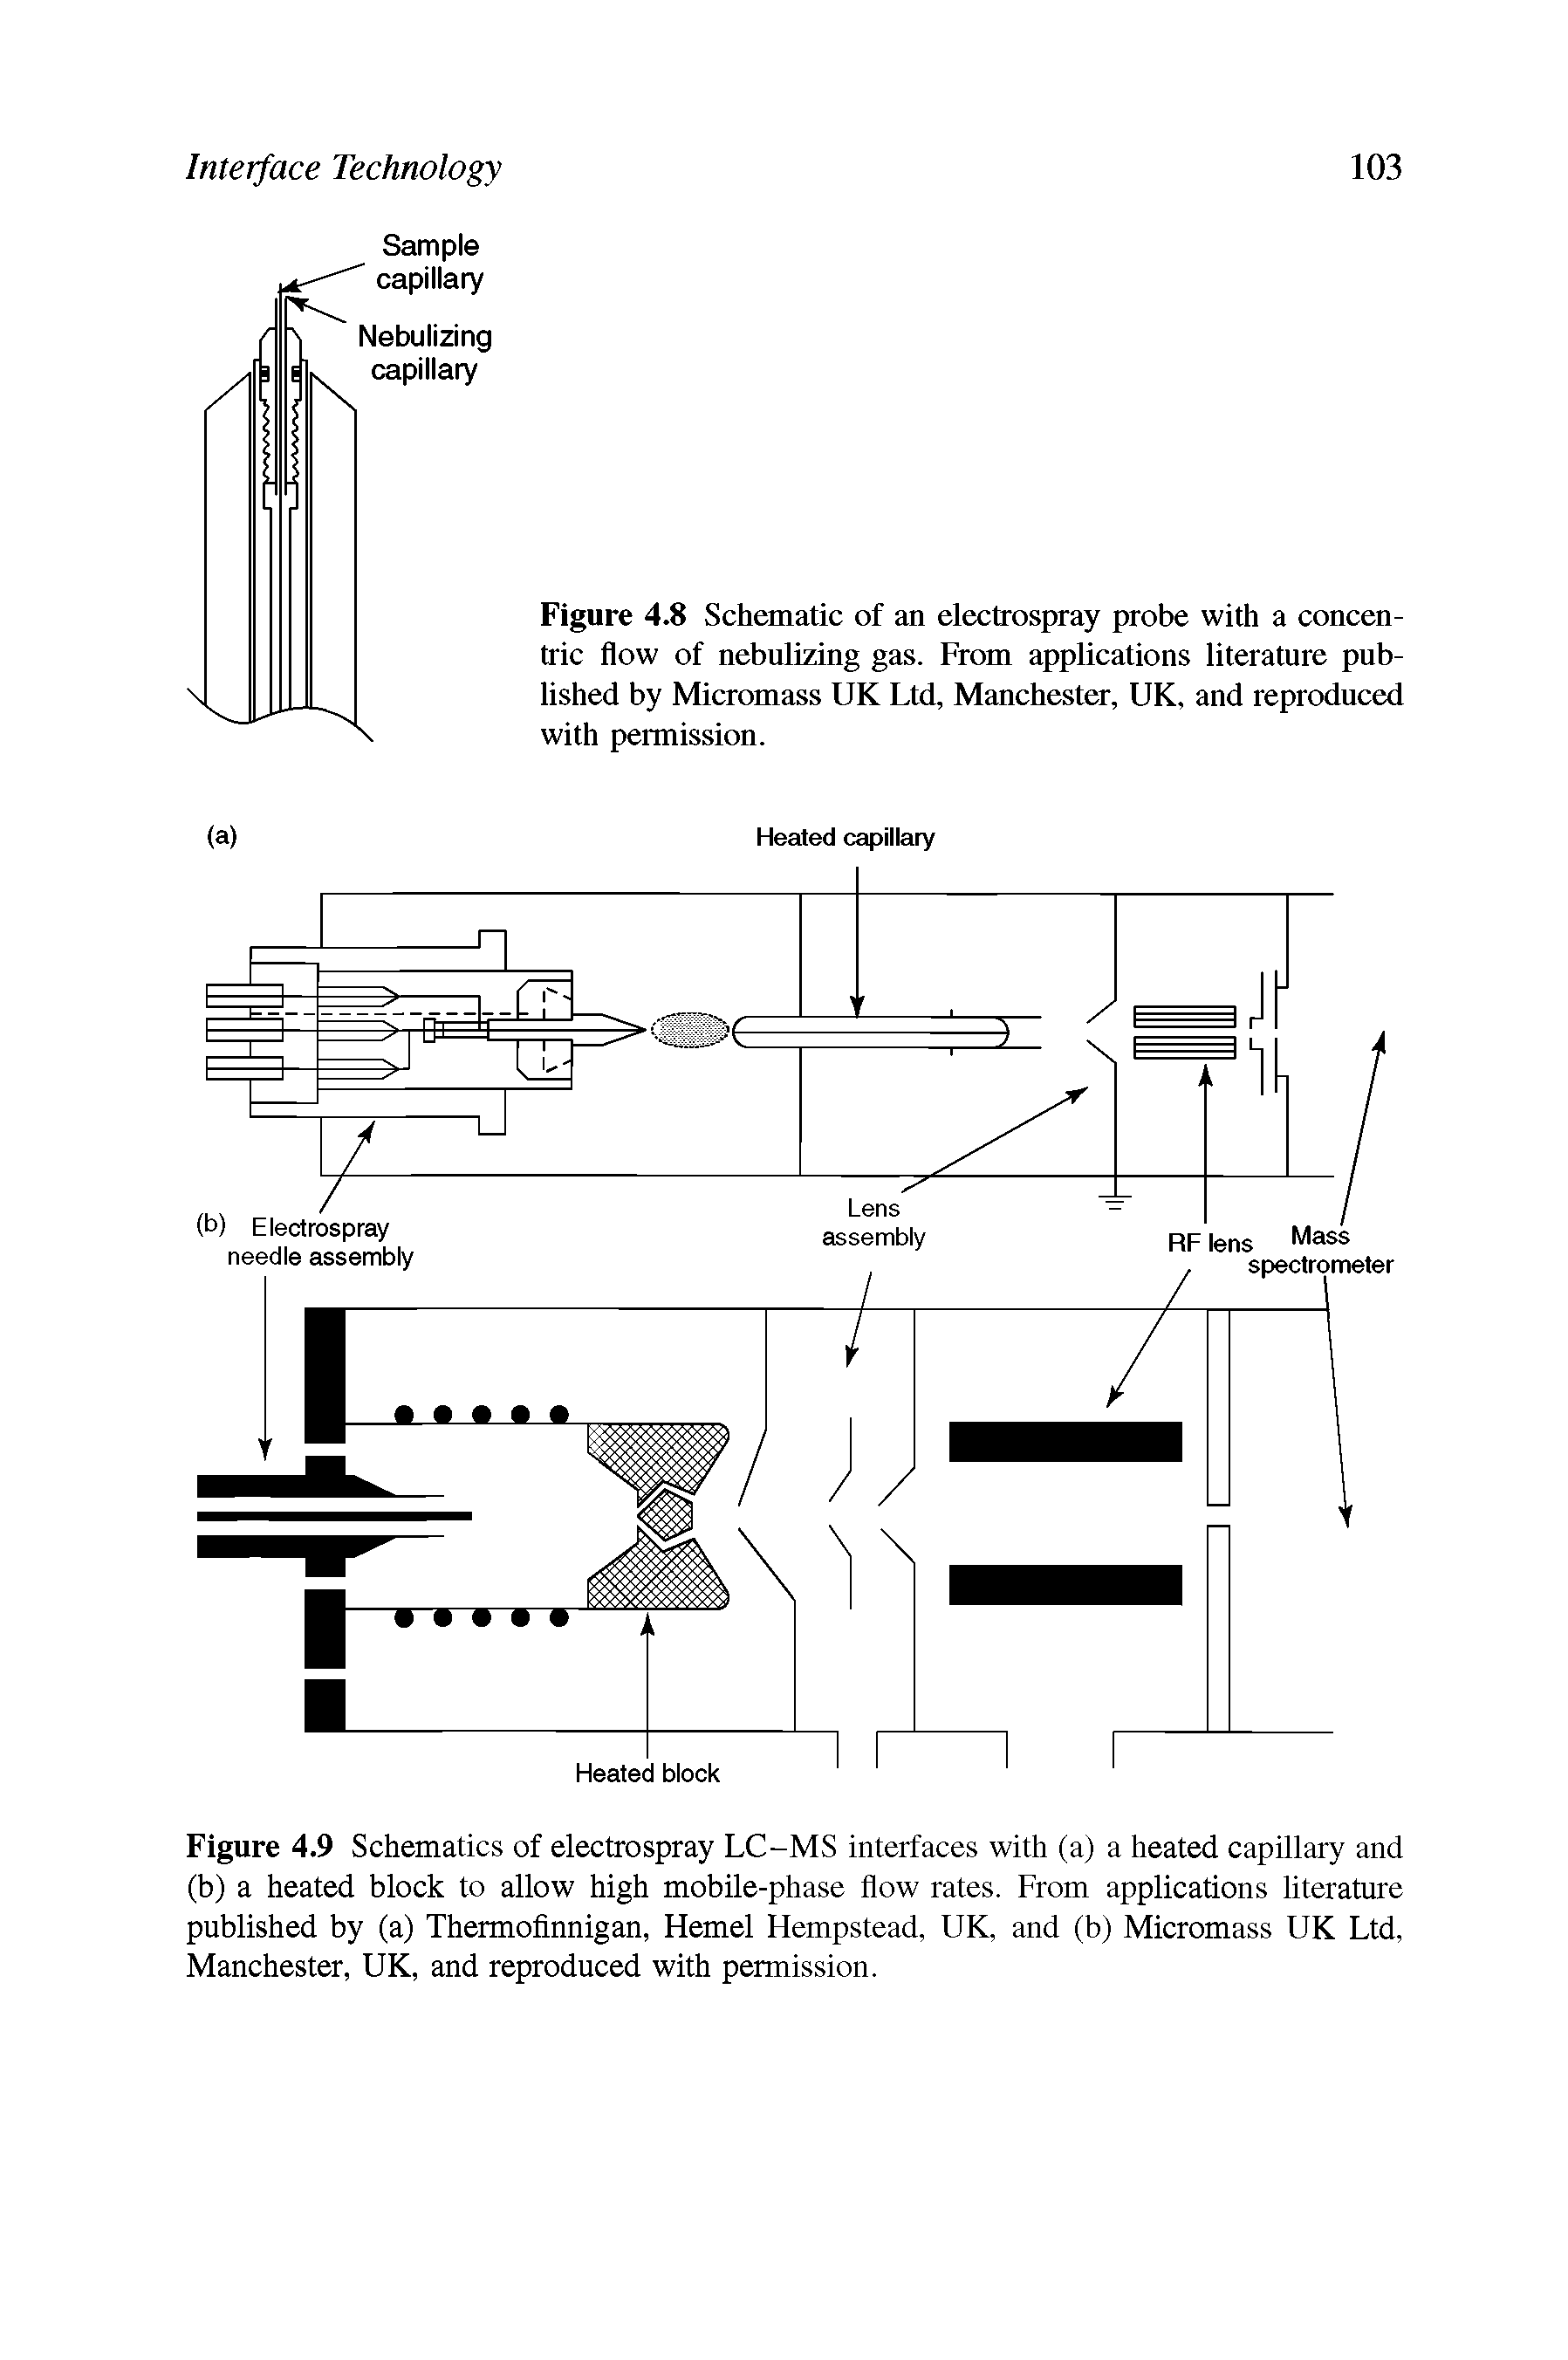 Figure 4.8 Schematic of an electrospray probe with a concentric flow of nebnlizing gas. From applications literature published by Micromass UK Ltd, Manchester, UK, and reproduced with permission.